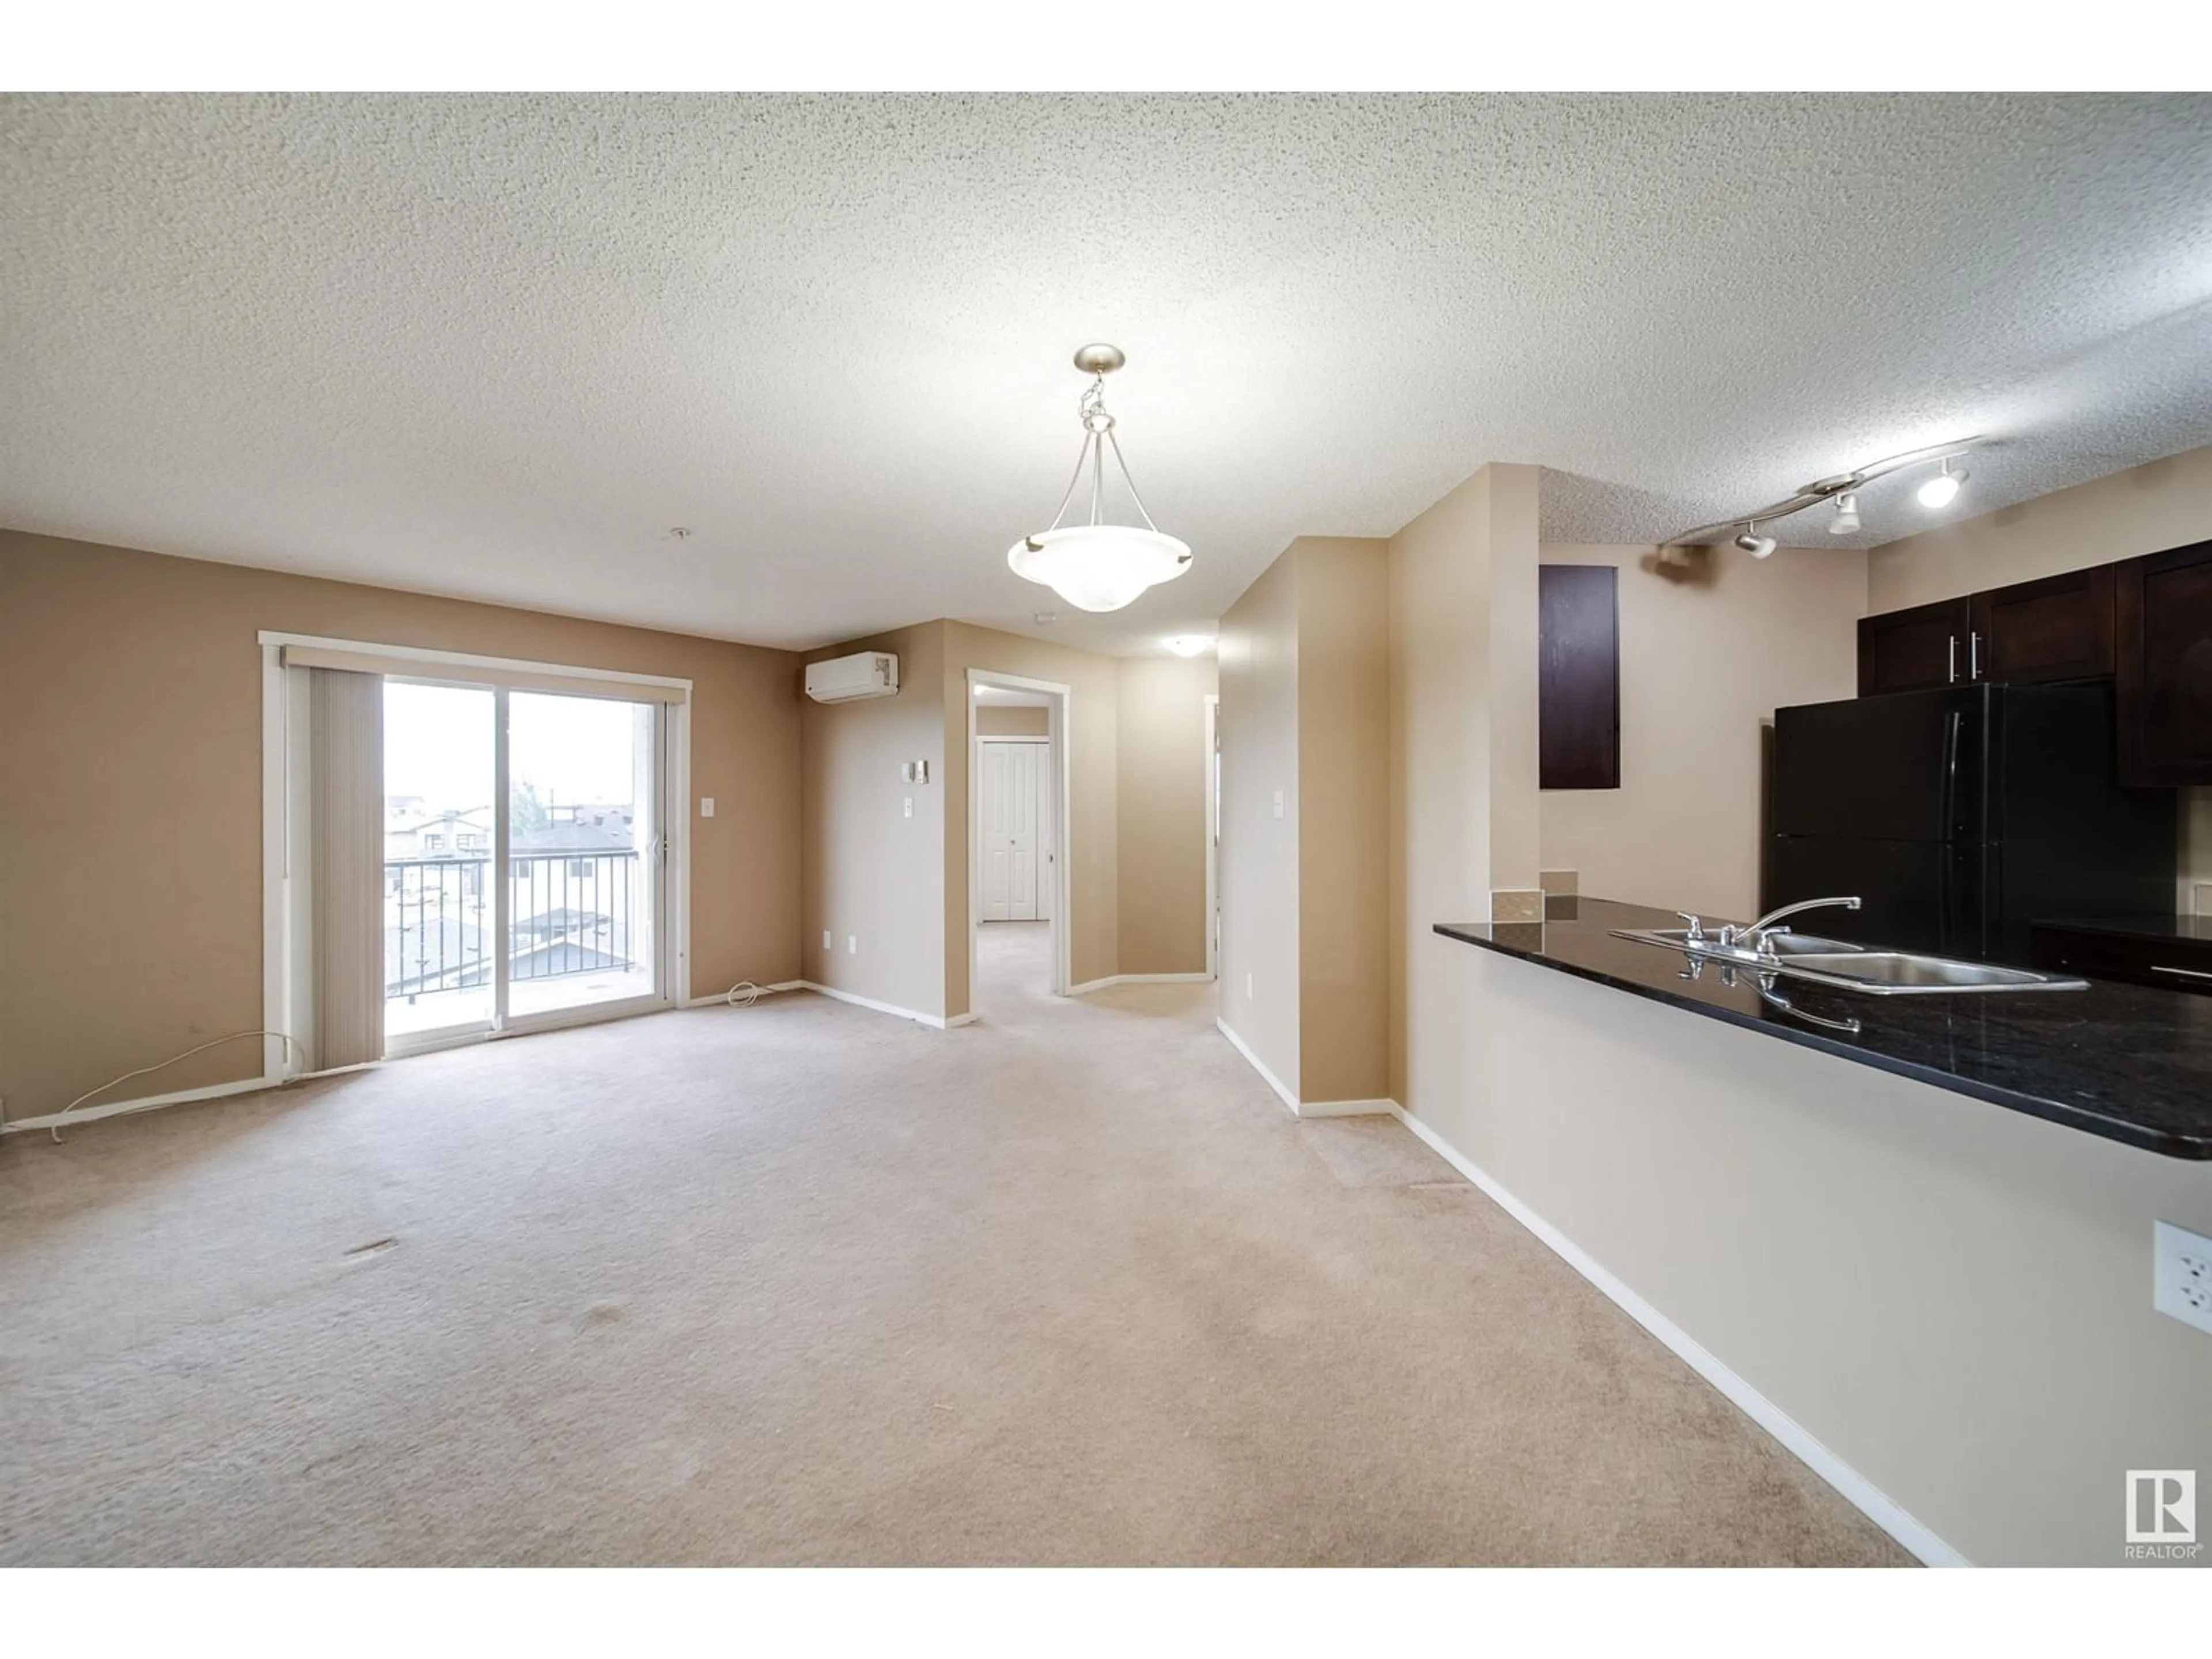 A pic of a room for #309 18122 77 ST NW, Edmonton Alberta T5Z0N7